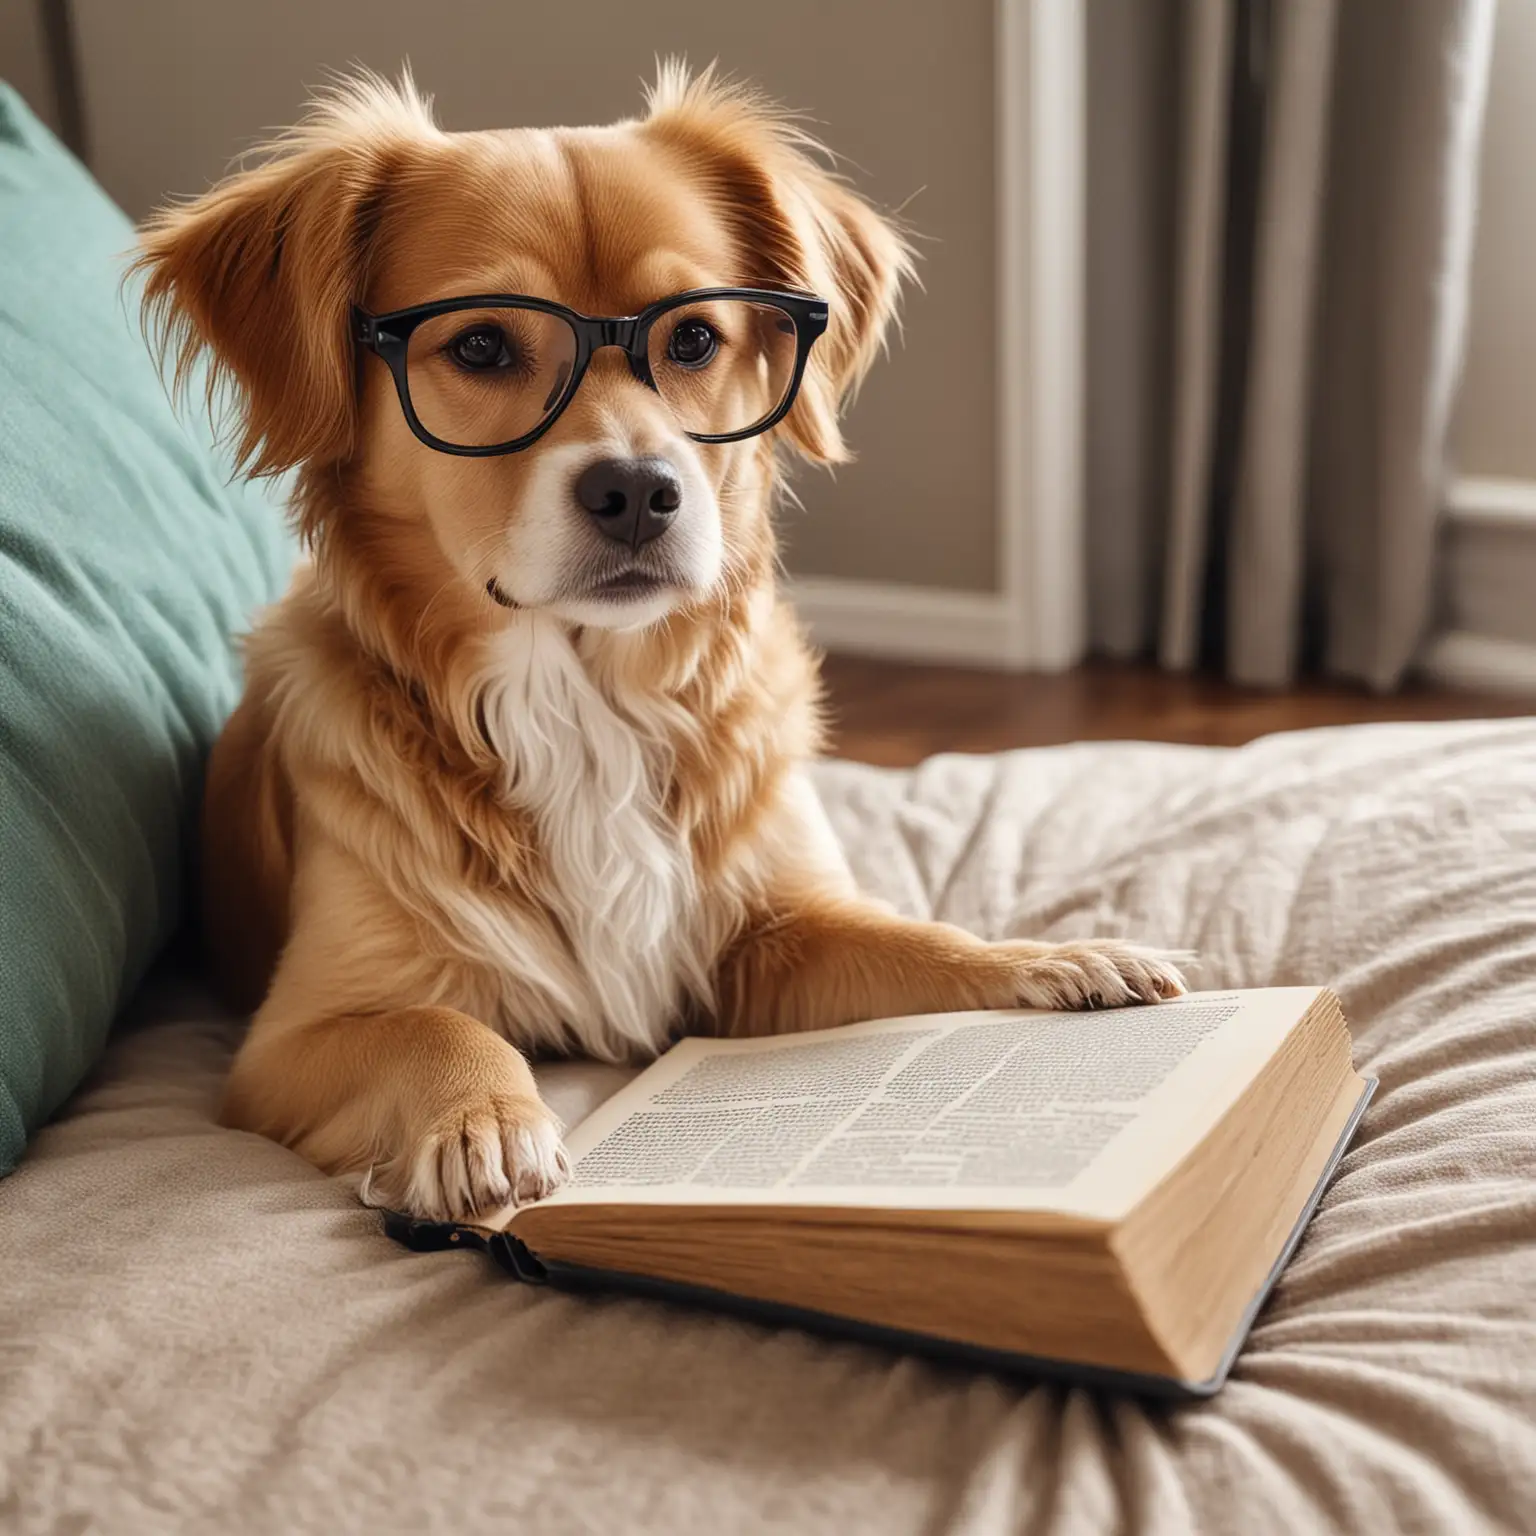 Smart Dog Reading a Book in Cozy Living Room Setting